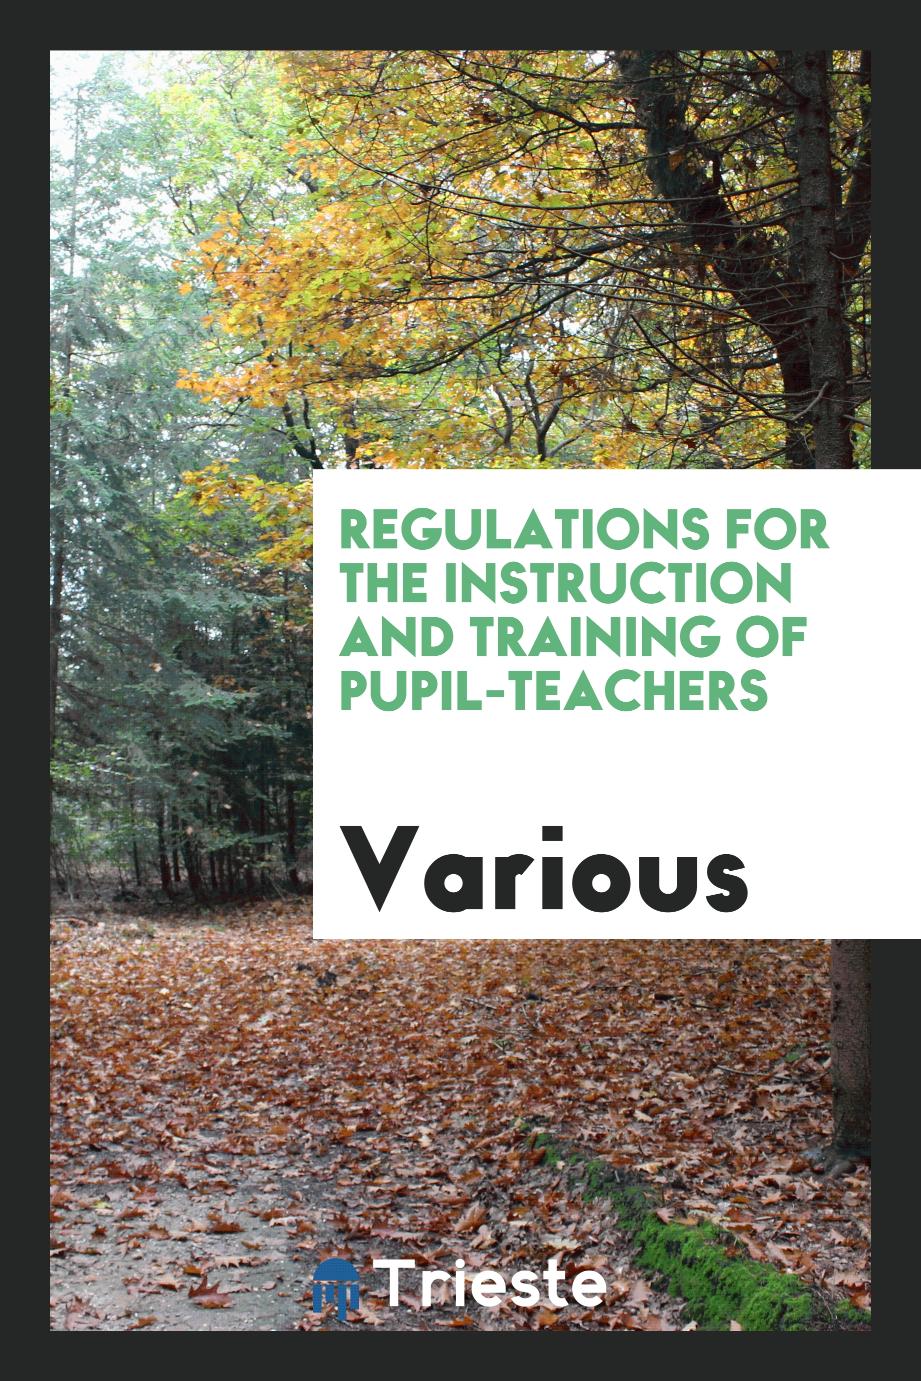 Regulations for the Instruction and Training of Pupil-teachers